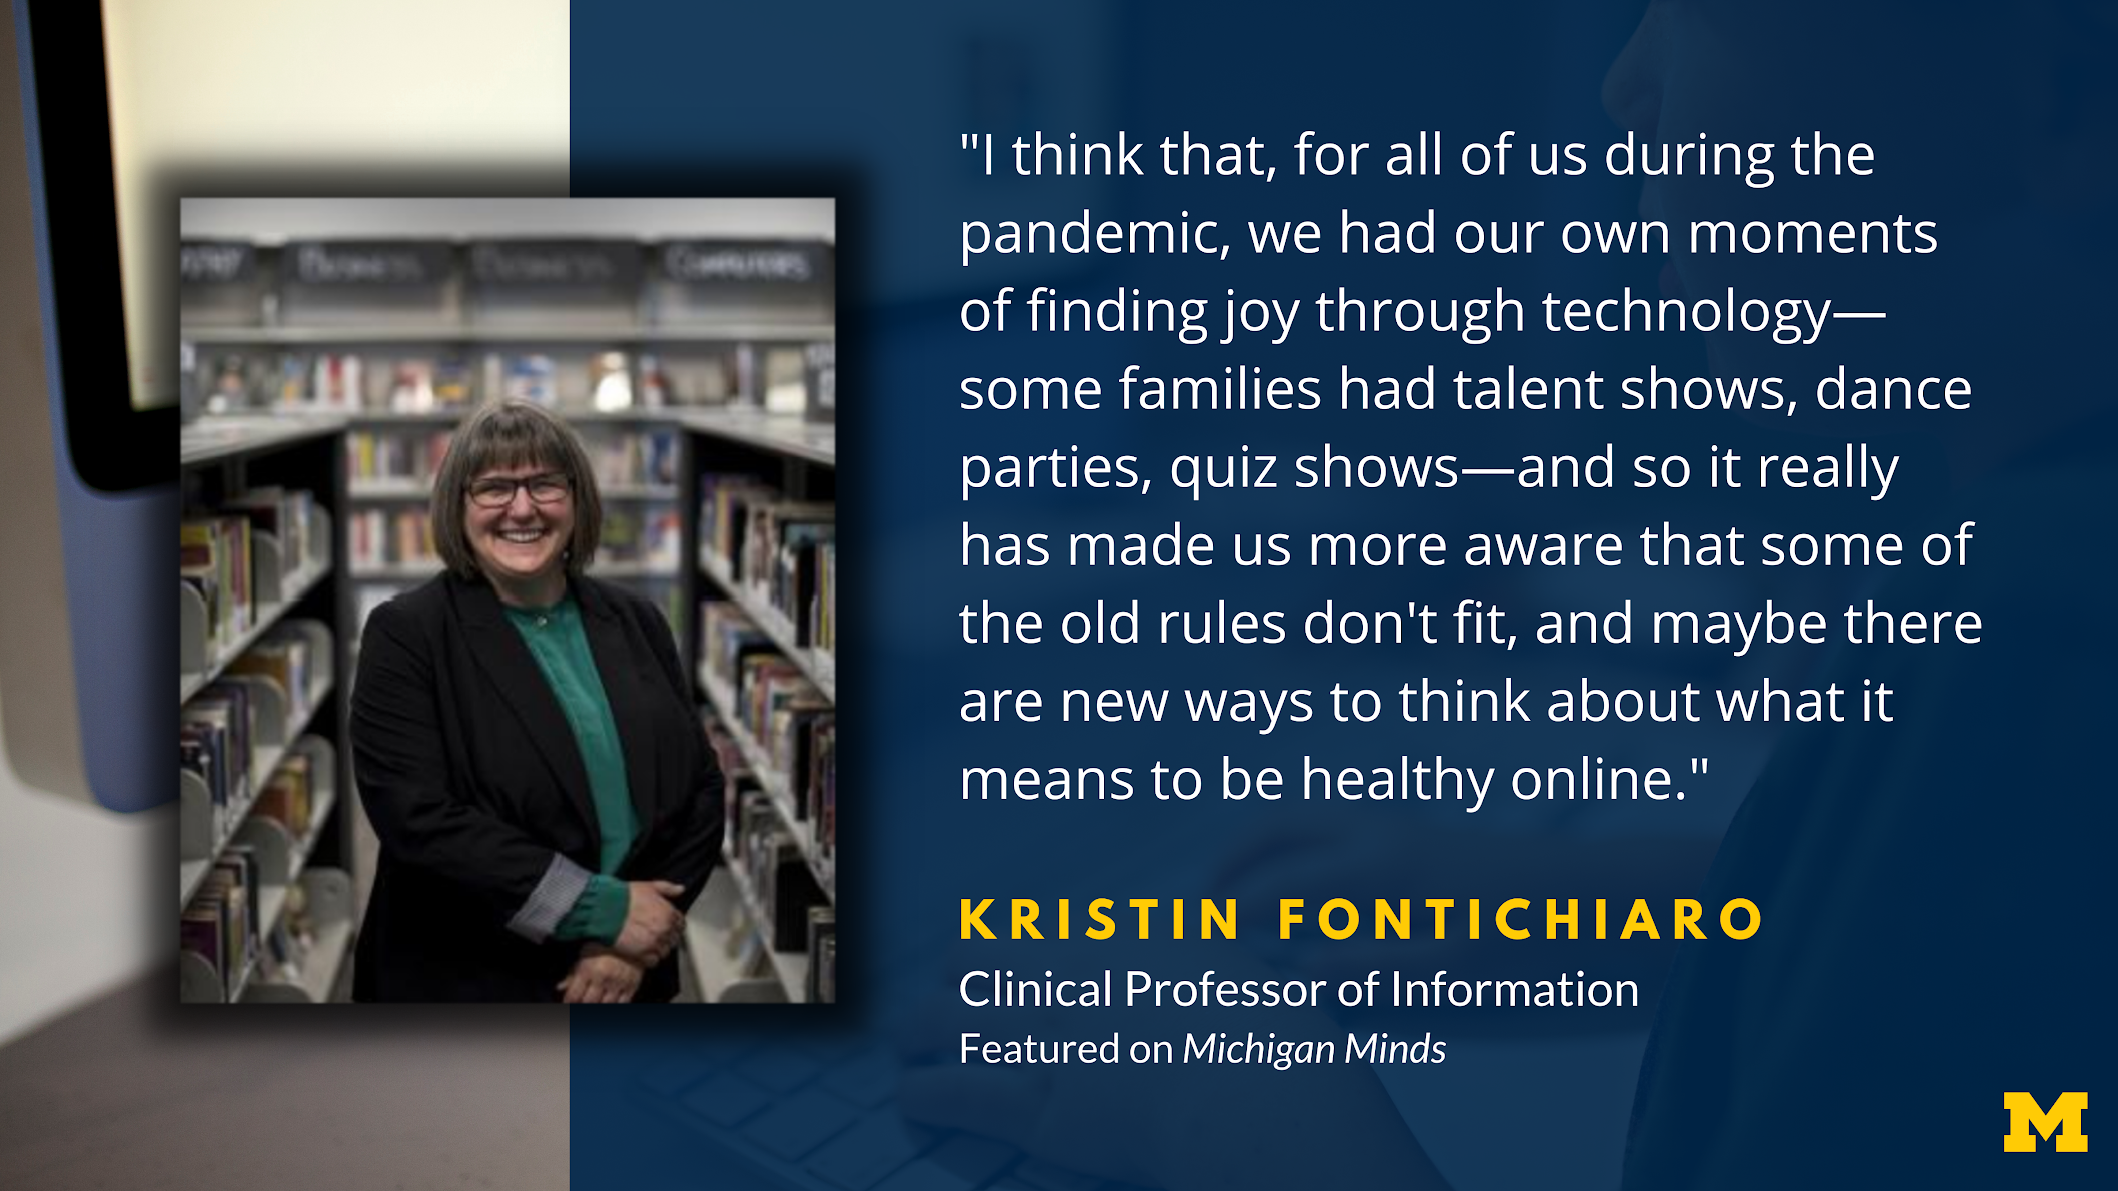 “I think that, for all of us during the pandemic, we had our own moments of finding joy through technology — some families had talent shows, dance parties, quiz shows — and so it really has made us more aware that some of the old rules don’t fit, and maybe there are new ways to think about what it means to be healthy online.” Kristin Fontichiaro. Clinical Professor of Information. Featured on Michigan Minds.